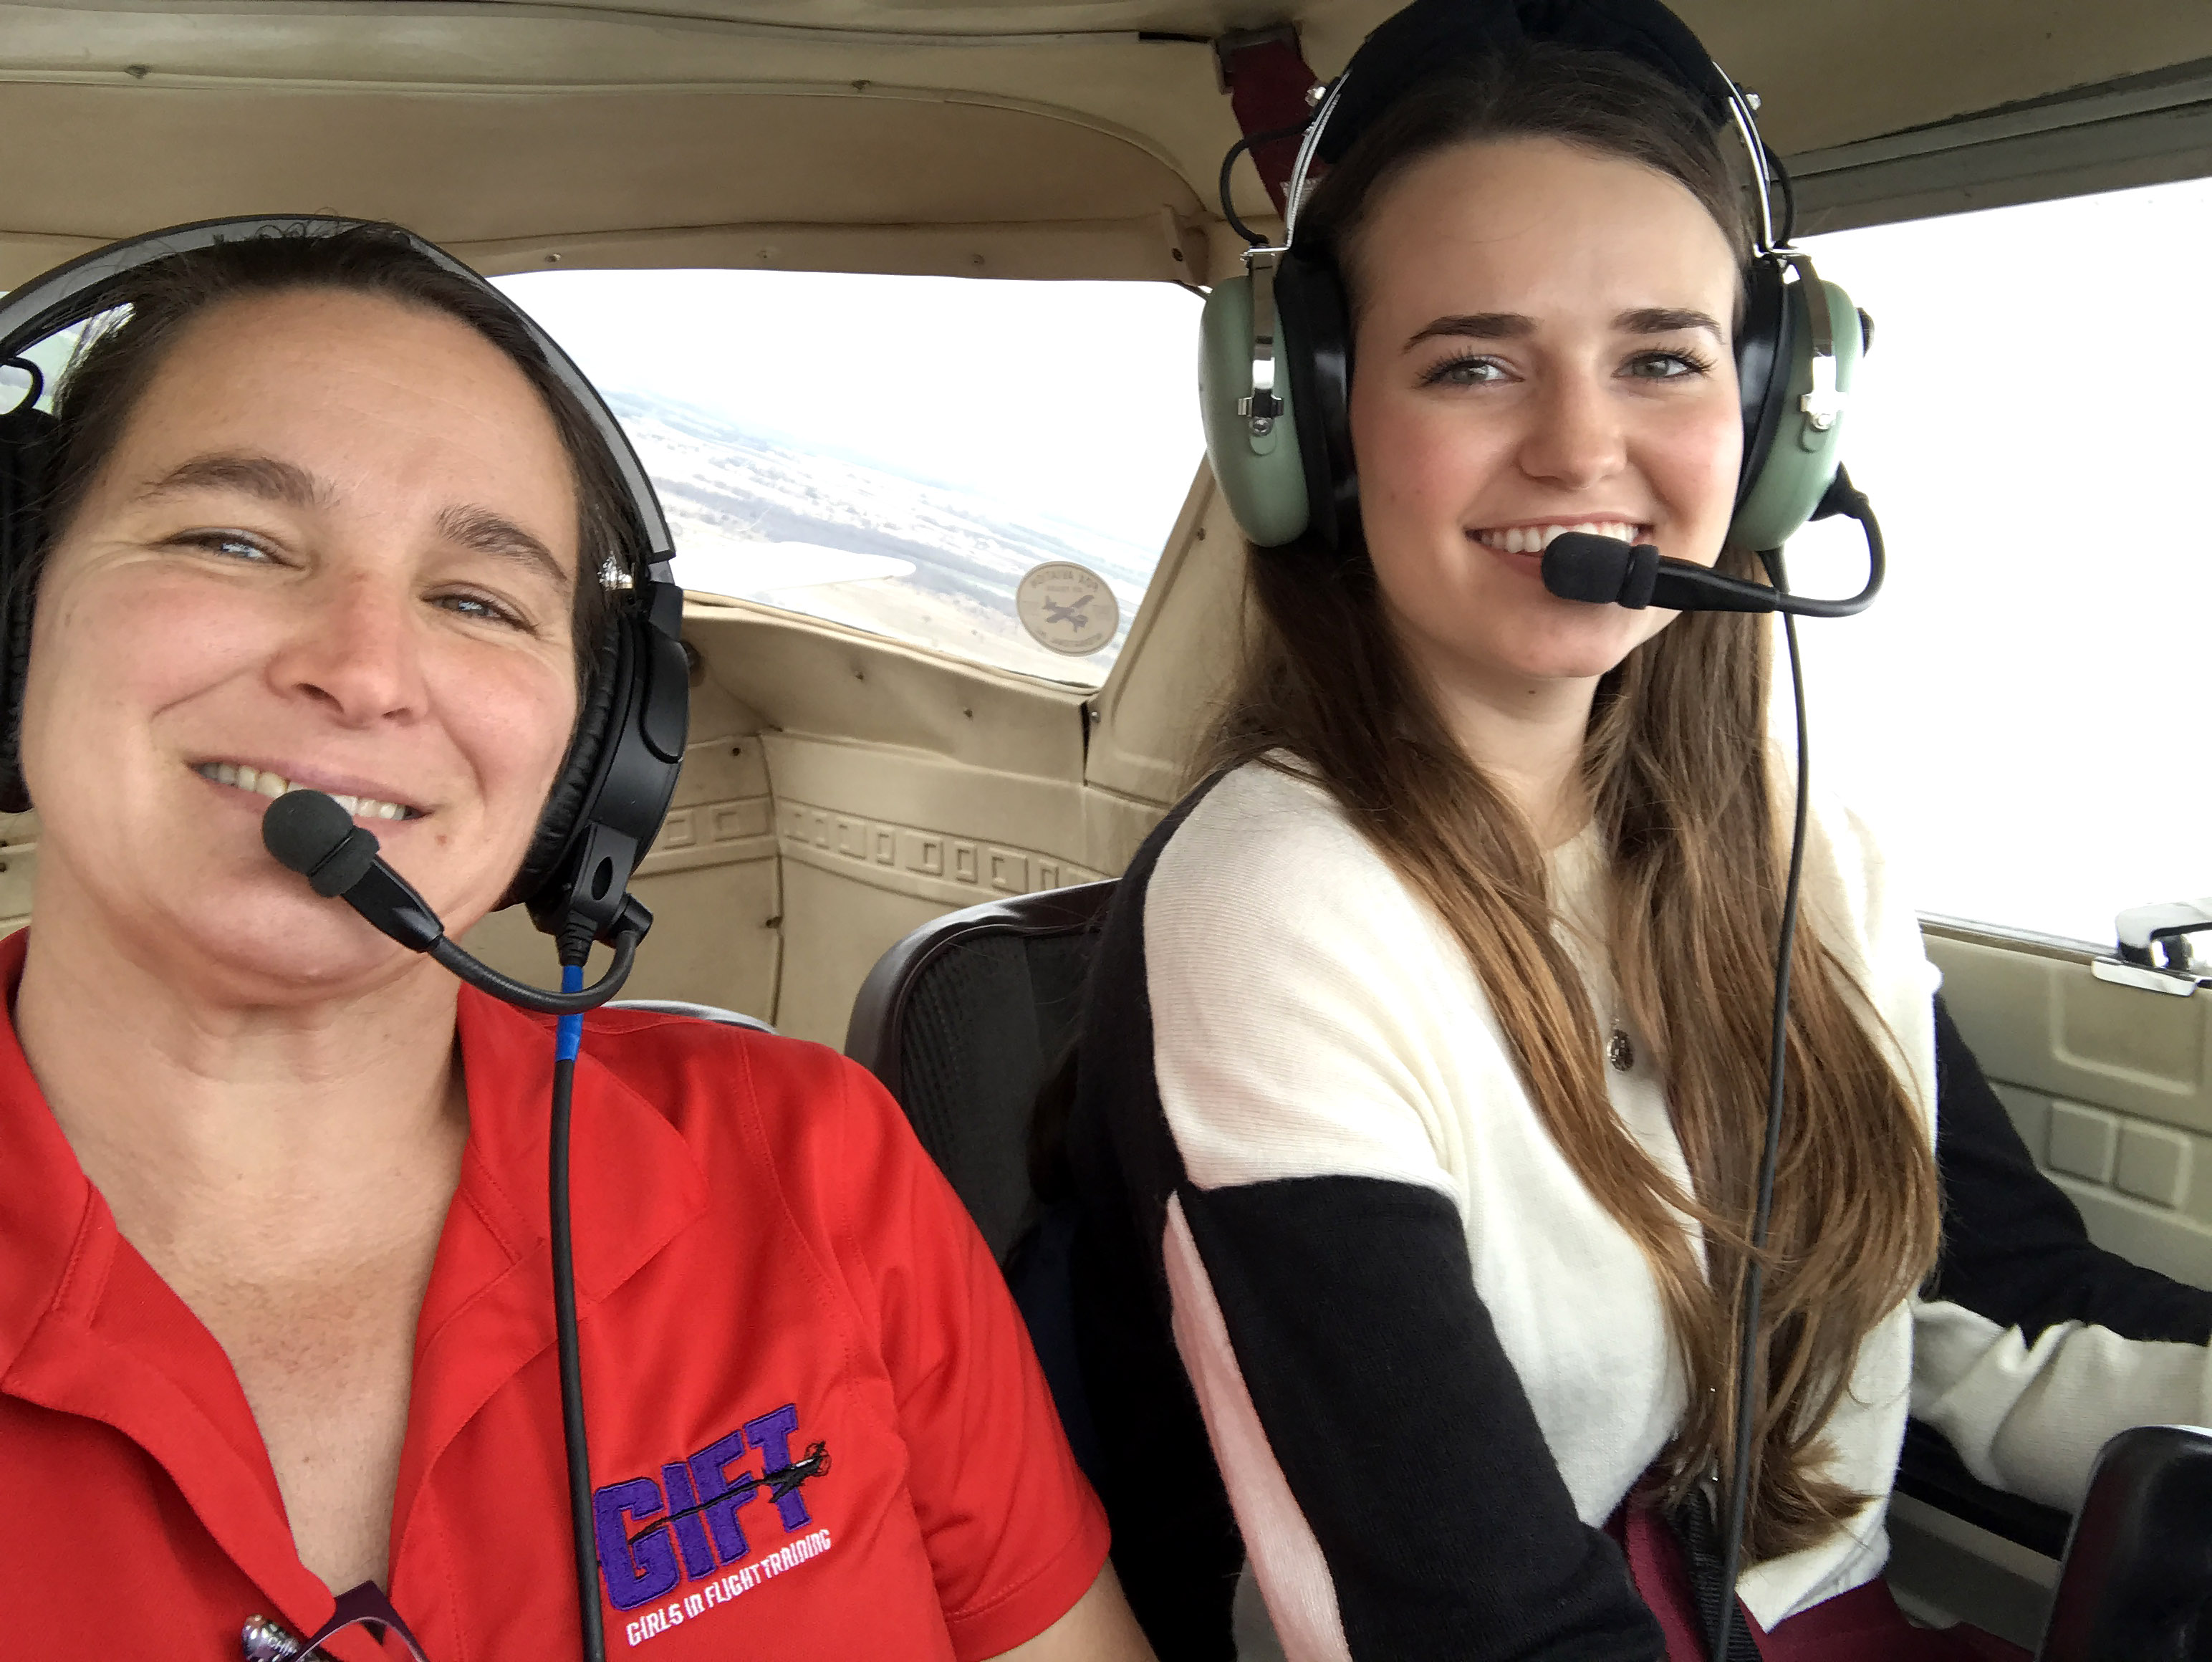 Girls in Flight Training (GIFT), a Texas-based nonprofit that focuses on helping women achieve success in flight training, is expanding the number of sessions it hosts. Photo courtesy of GIFT.